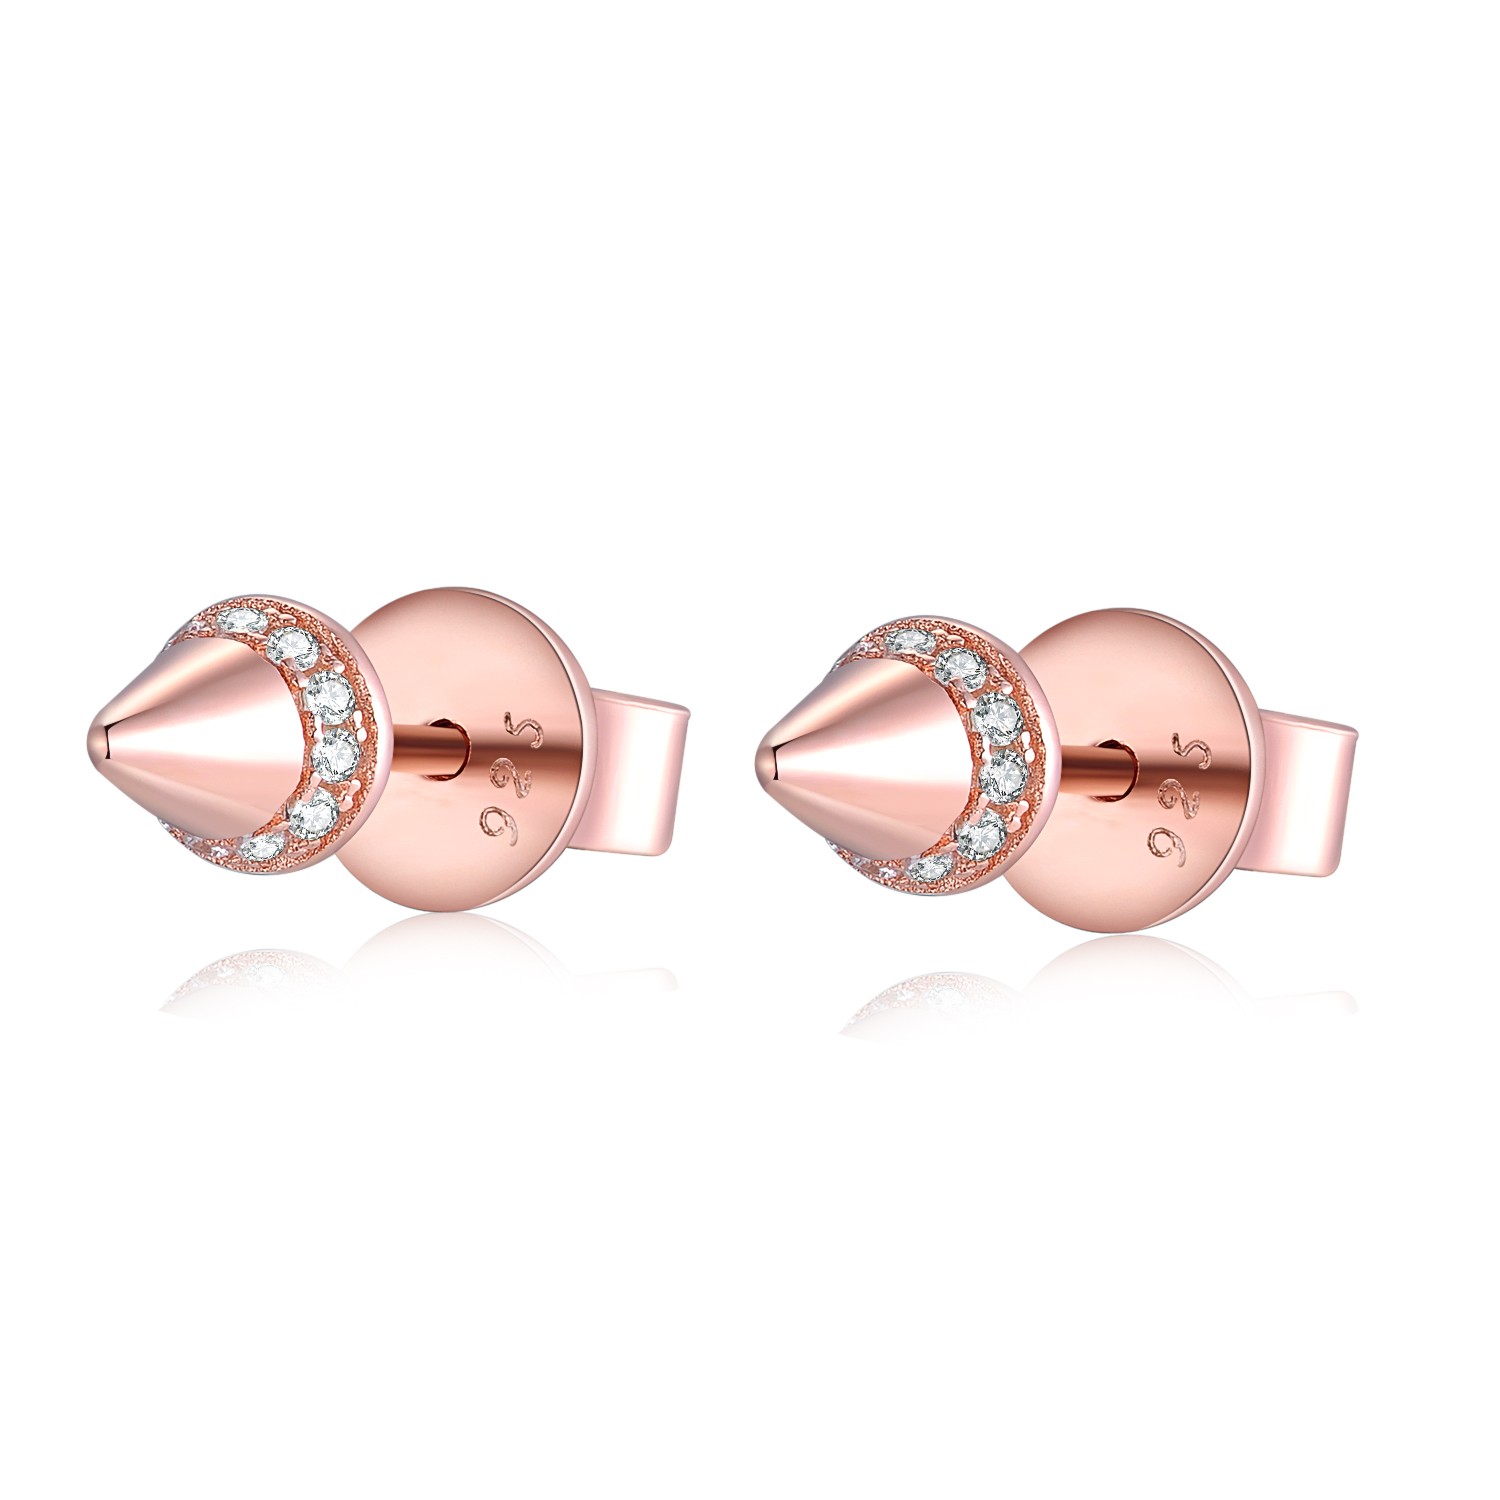 Rose Gold Plated Studs Earrings Women Fashion Wholesale 925 Silver Jewelry